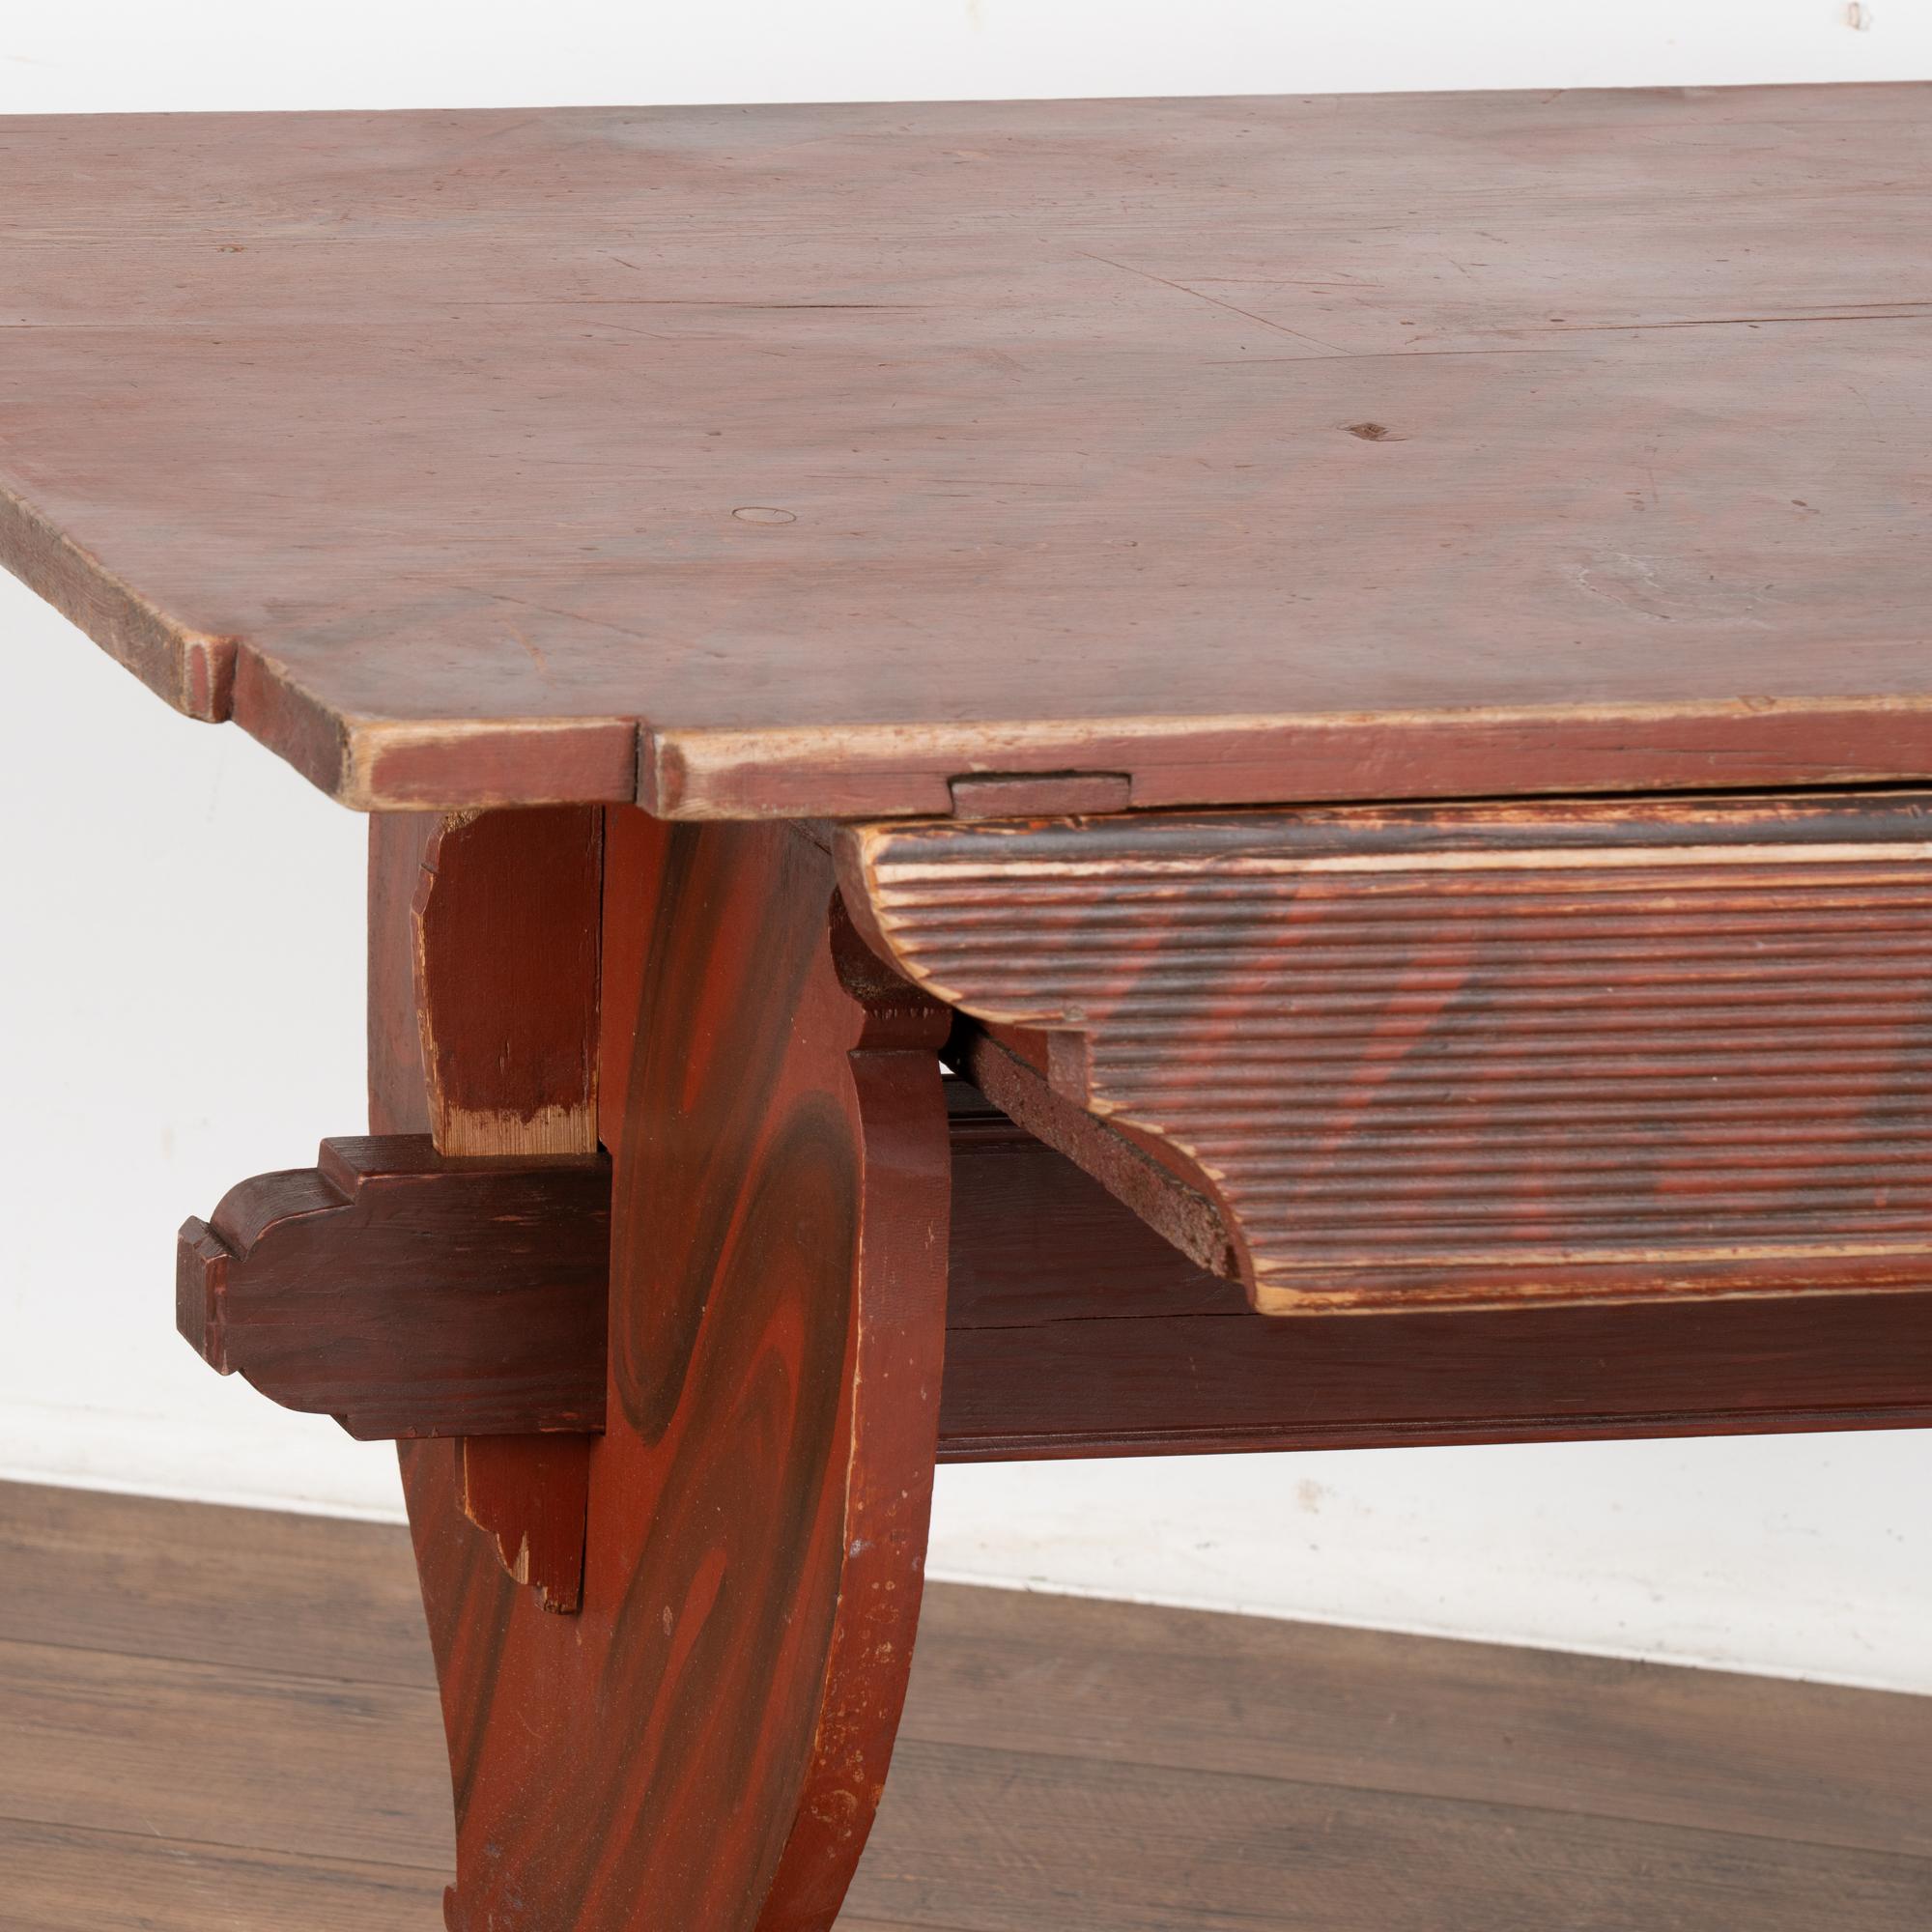 Original Red Painted Farm Table With Drawer, Sweden circa 1820-40 For Sale 2